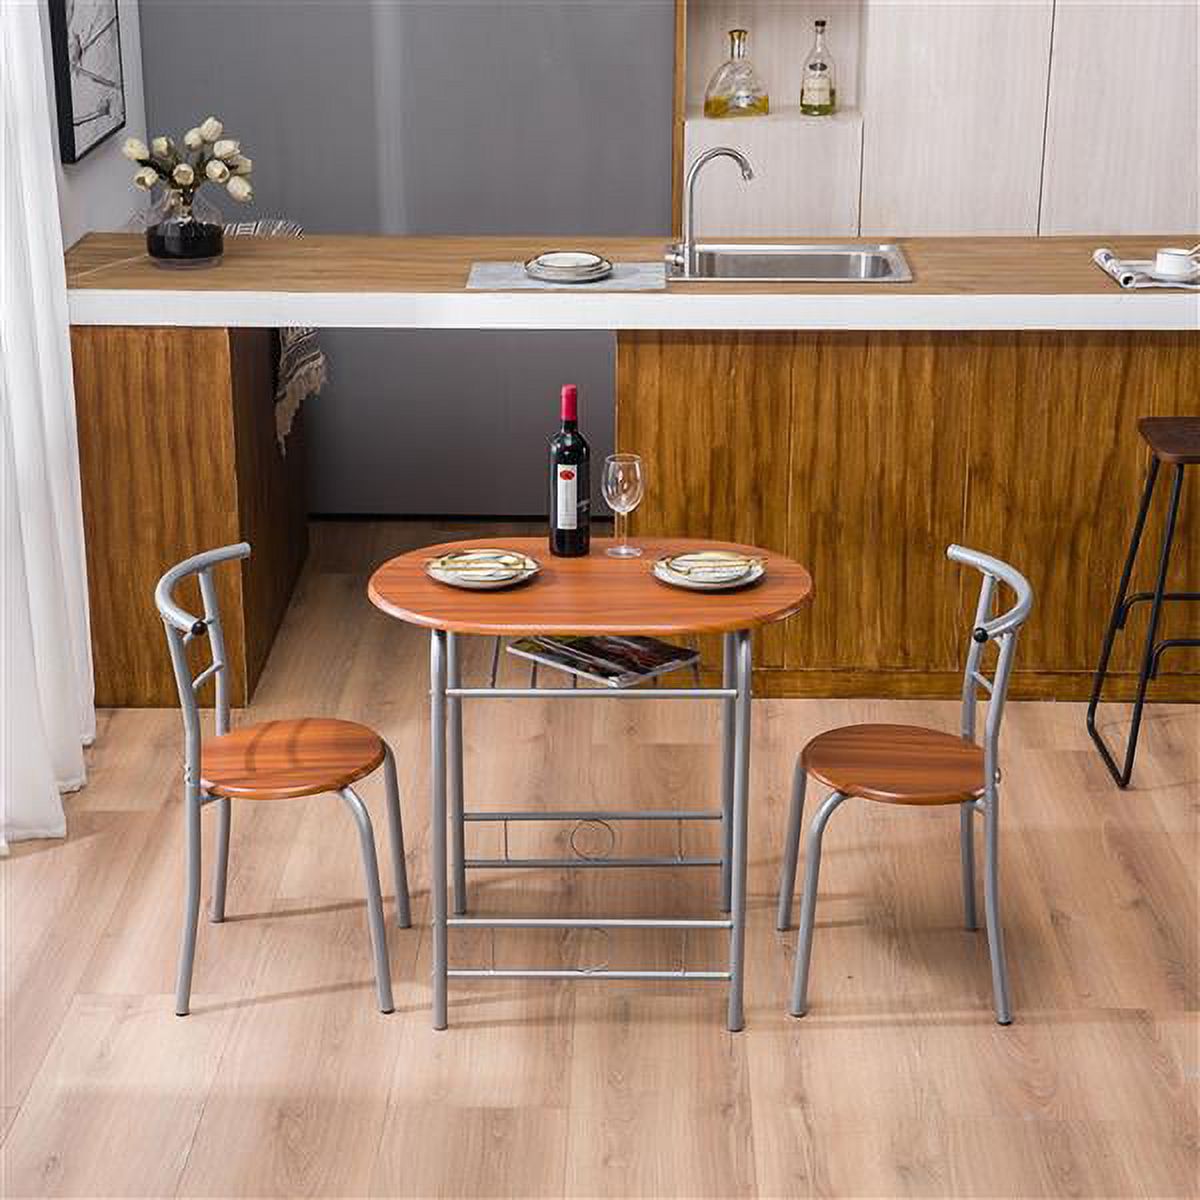 3 Pcs Dining Table and Chairs Set,Simple Wood 3 Piece Dining Set Contemporary Dining Table Set with Two Stools Home Kitchen Breakfast Table - image 1 of 9